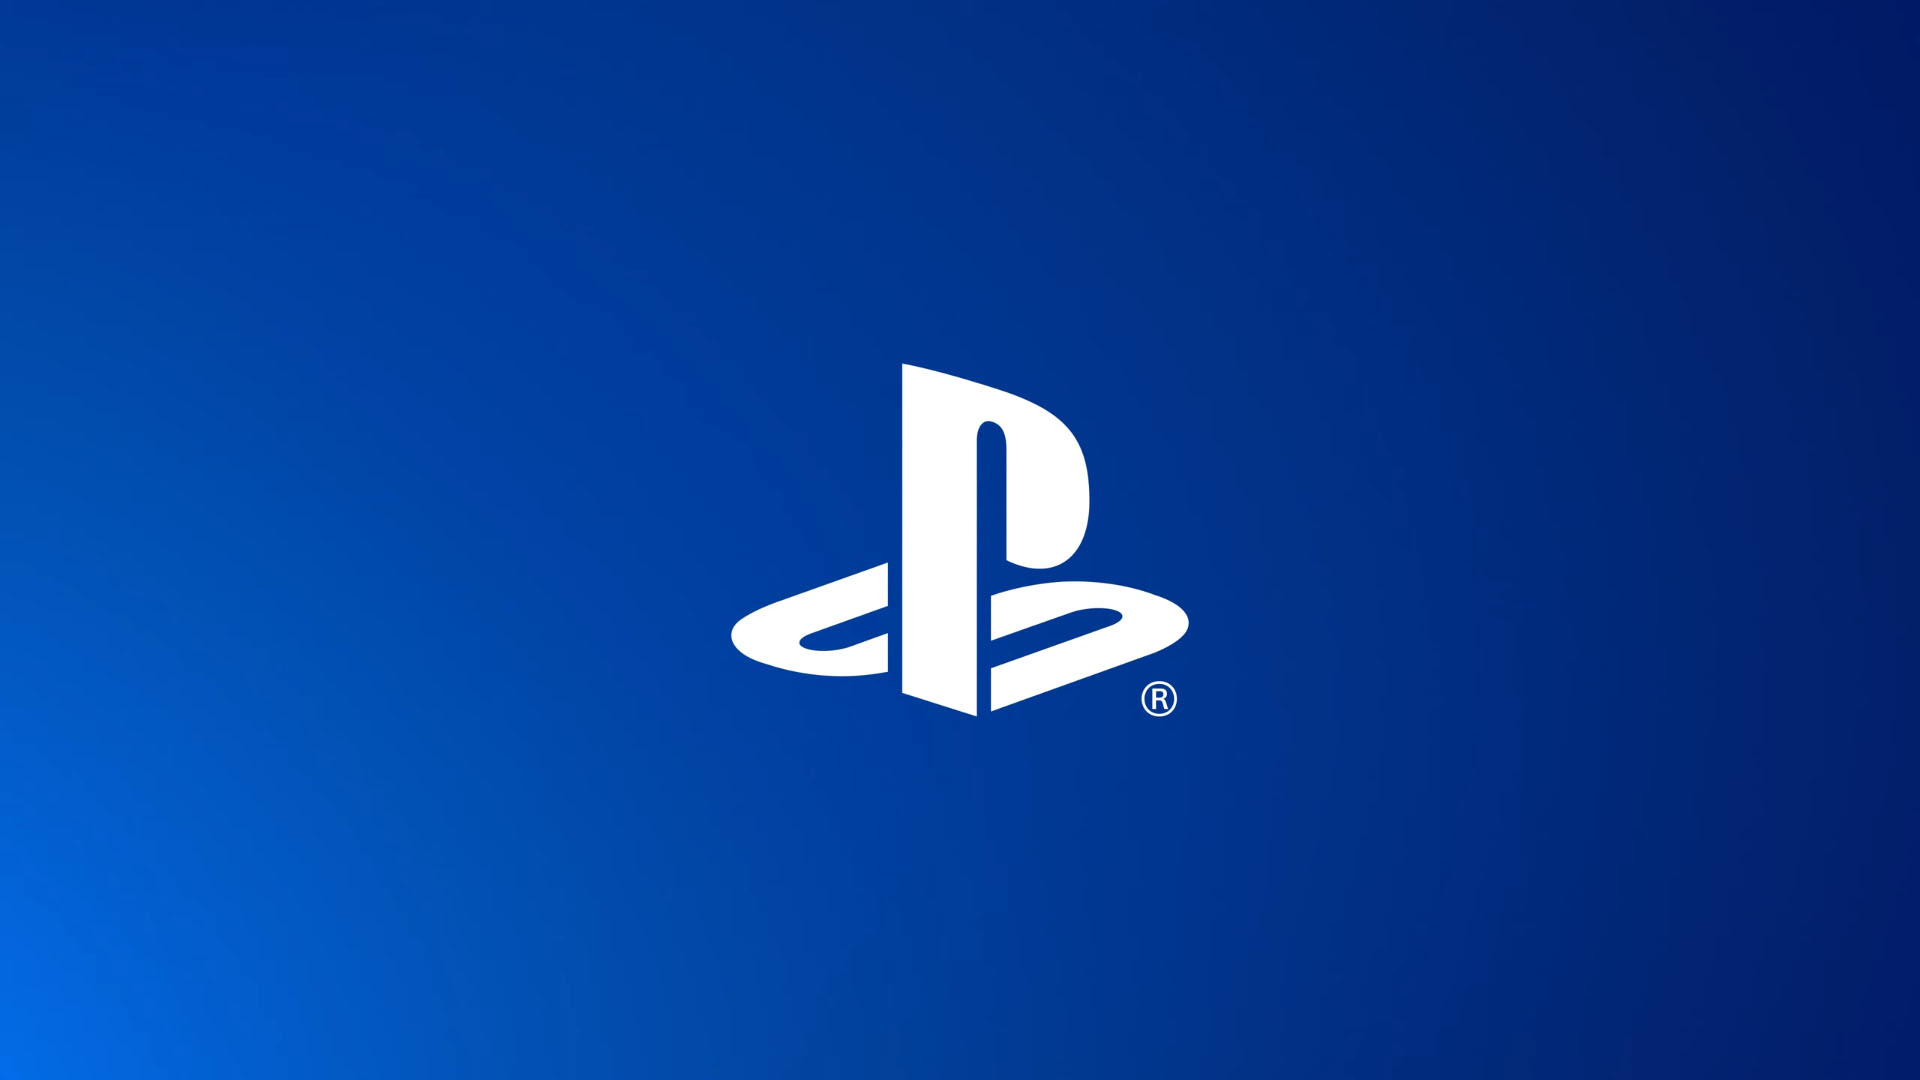 2023 PlayStation Showcase Confirmed: What Should We Expect? 